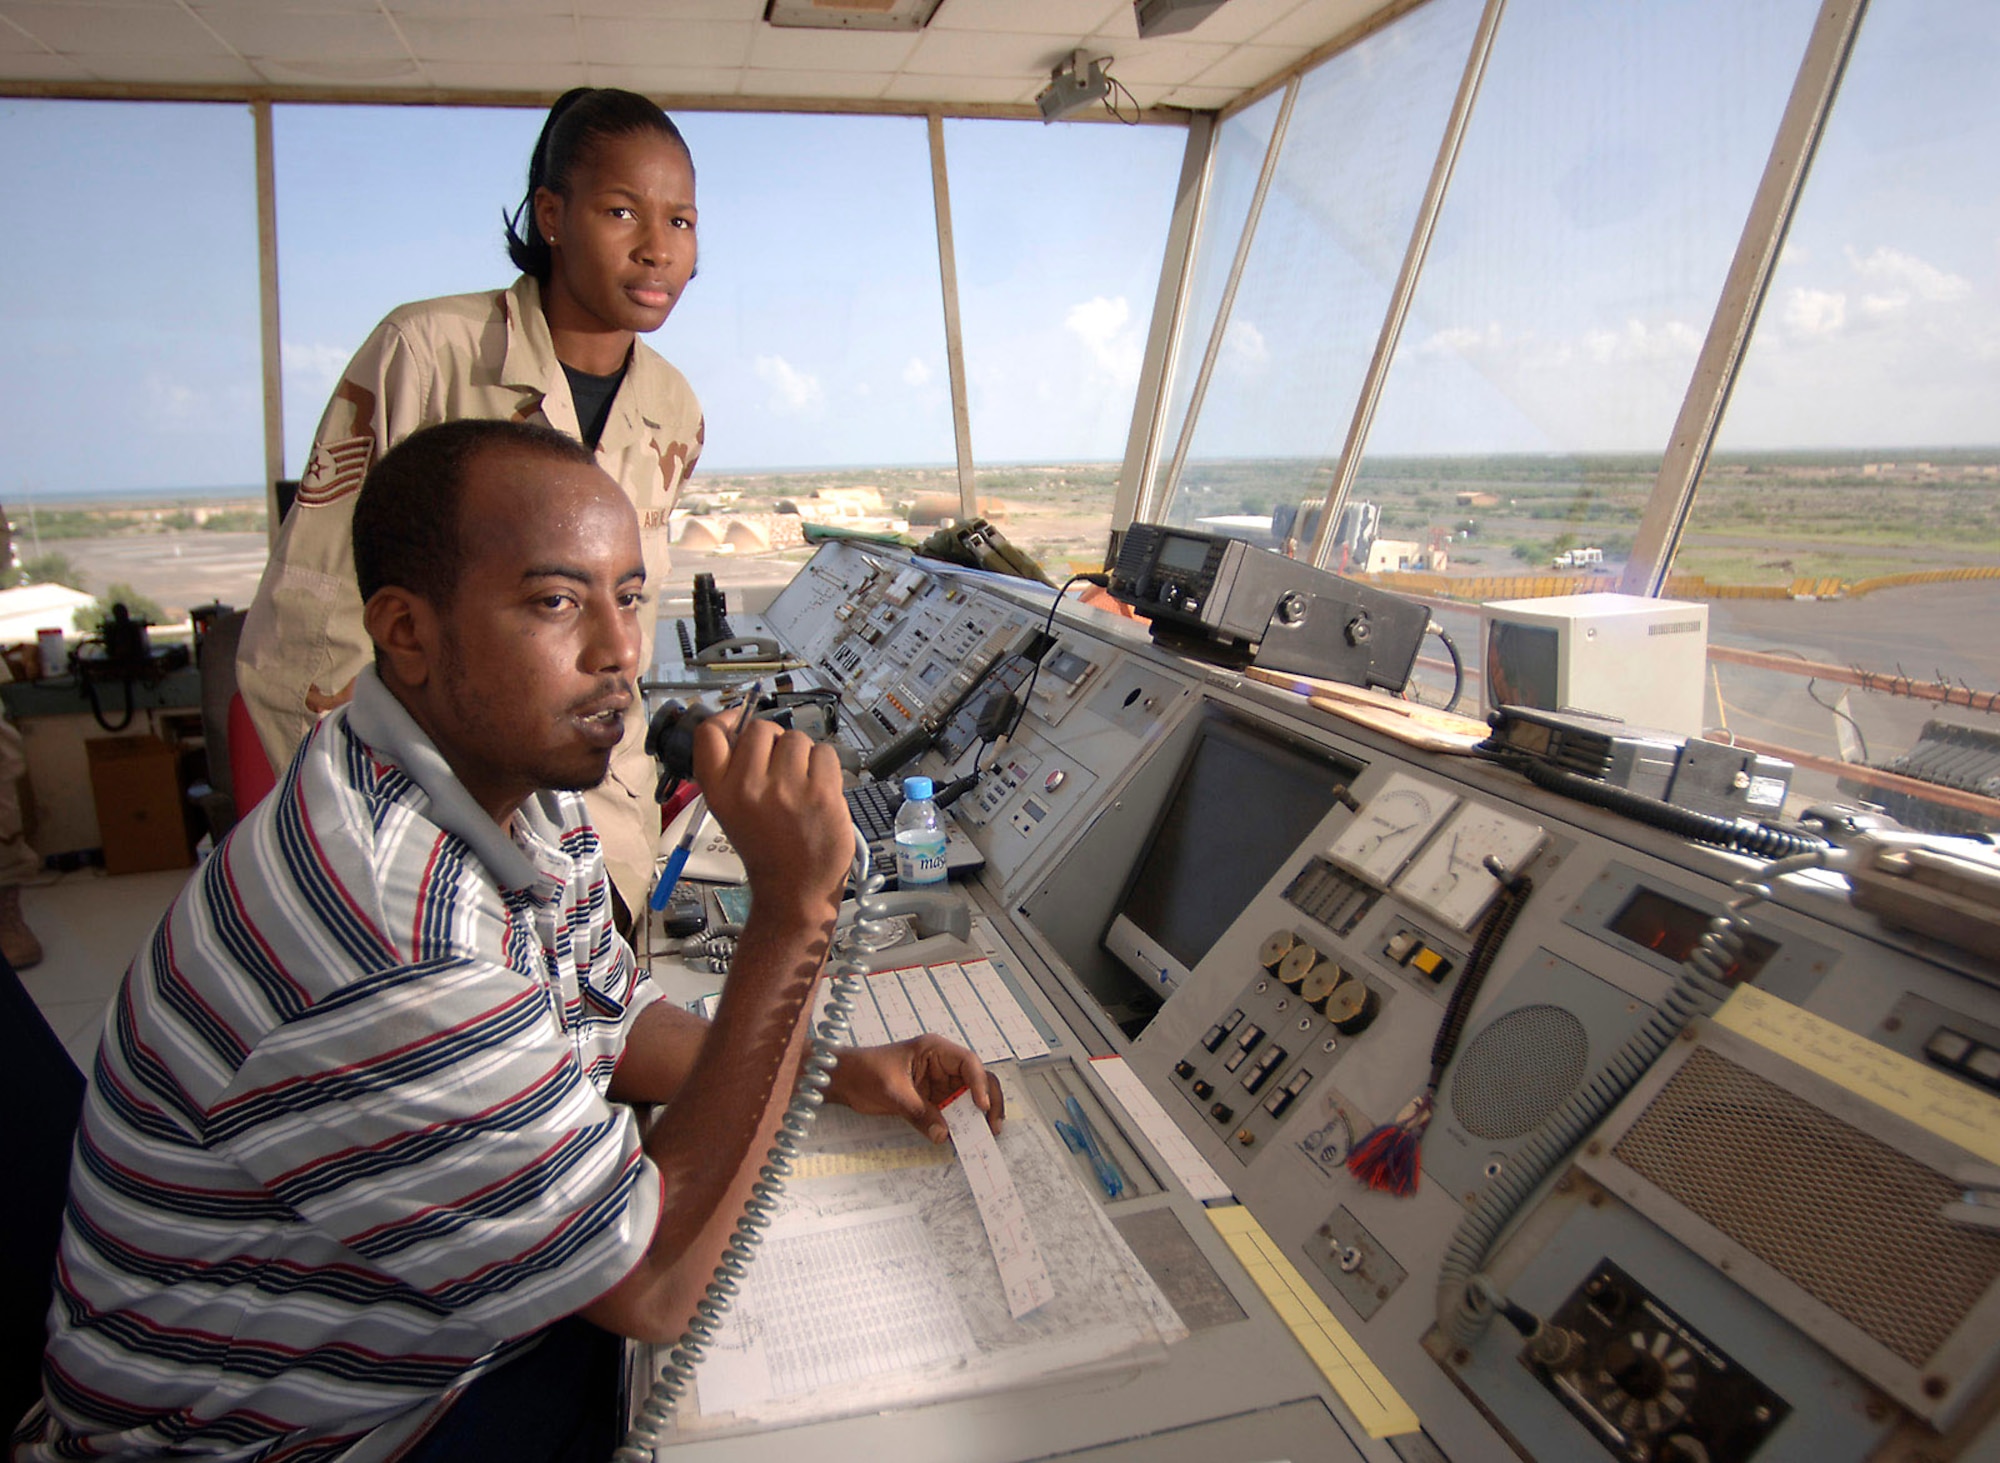 Tech. Sgt. Monique Whitaker works with Mahad Omar, a Djiboutian air traffic controller, on the upper level of the Djibouti Ambouli Tower where she and her Djiboutian counterparts help direct the arrival and departure of an average of 20 military sorties per day. Sergeant Whitaker is an air traffic control liaison assigned to Combined Joint Task Force-Horn of Africa at Camp Lemonier, Djibouti, from Spangdahlem Air Base, Germany. (U.S. Air Force photo/Master Sgt. Scott Wagers)
